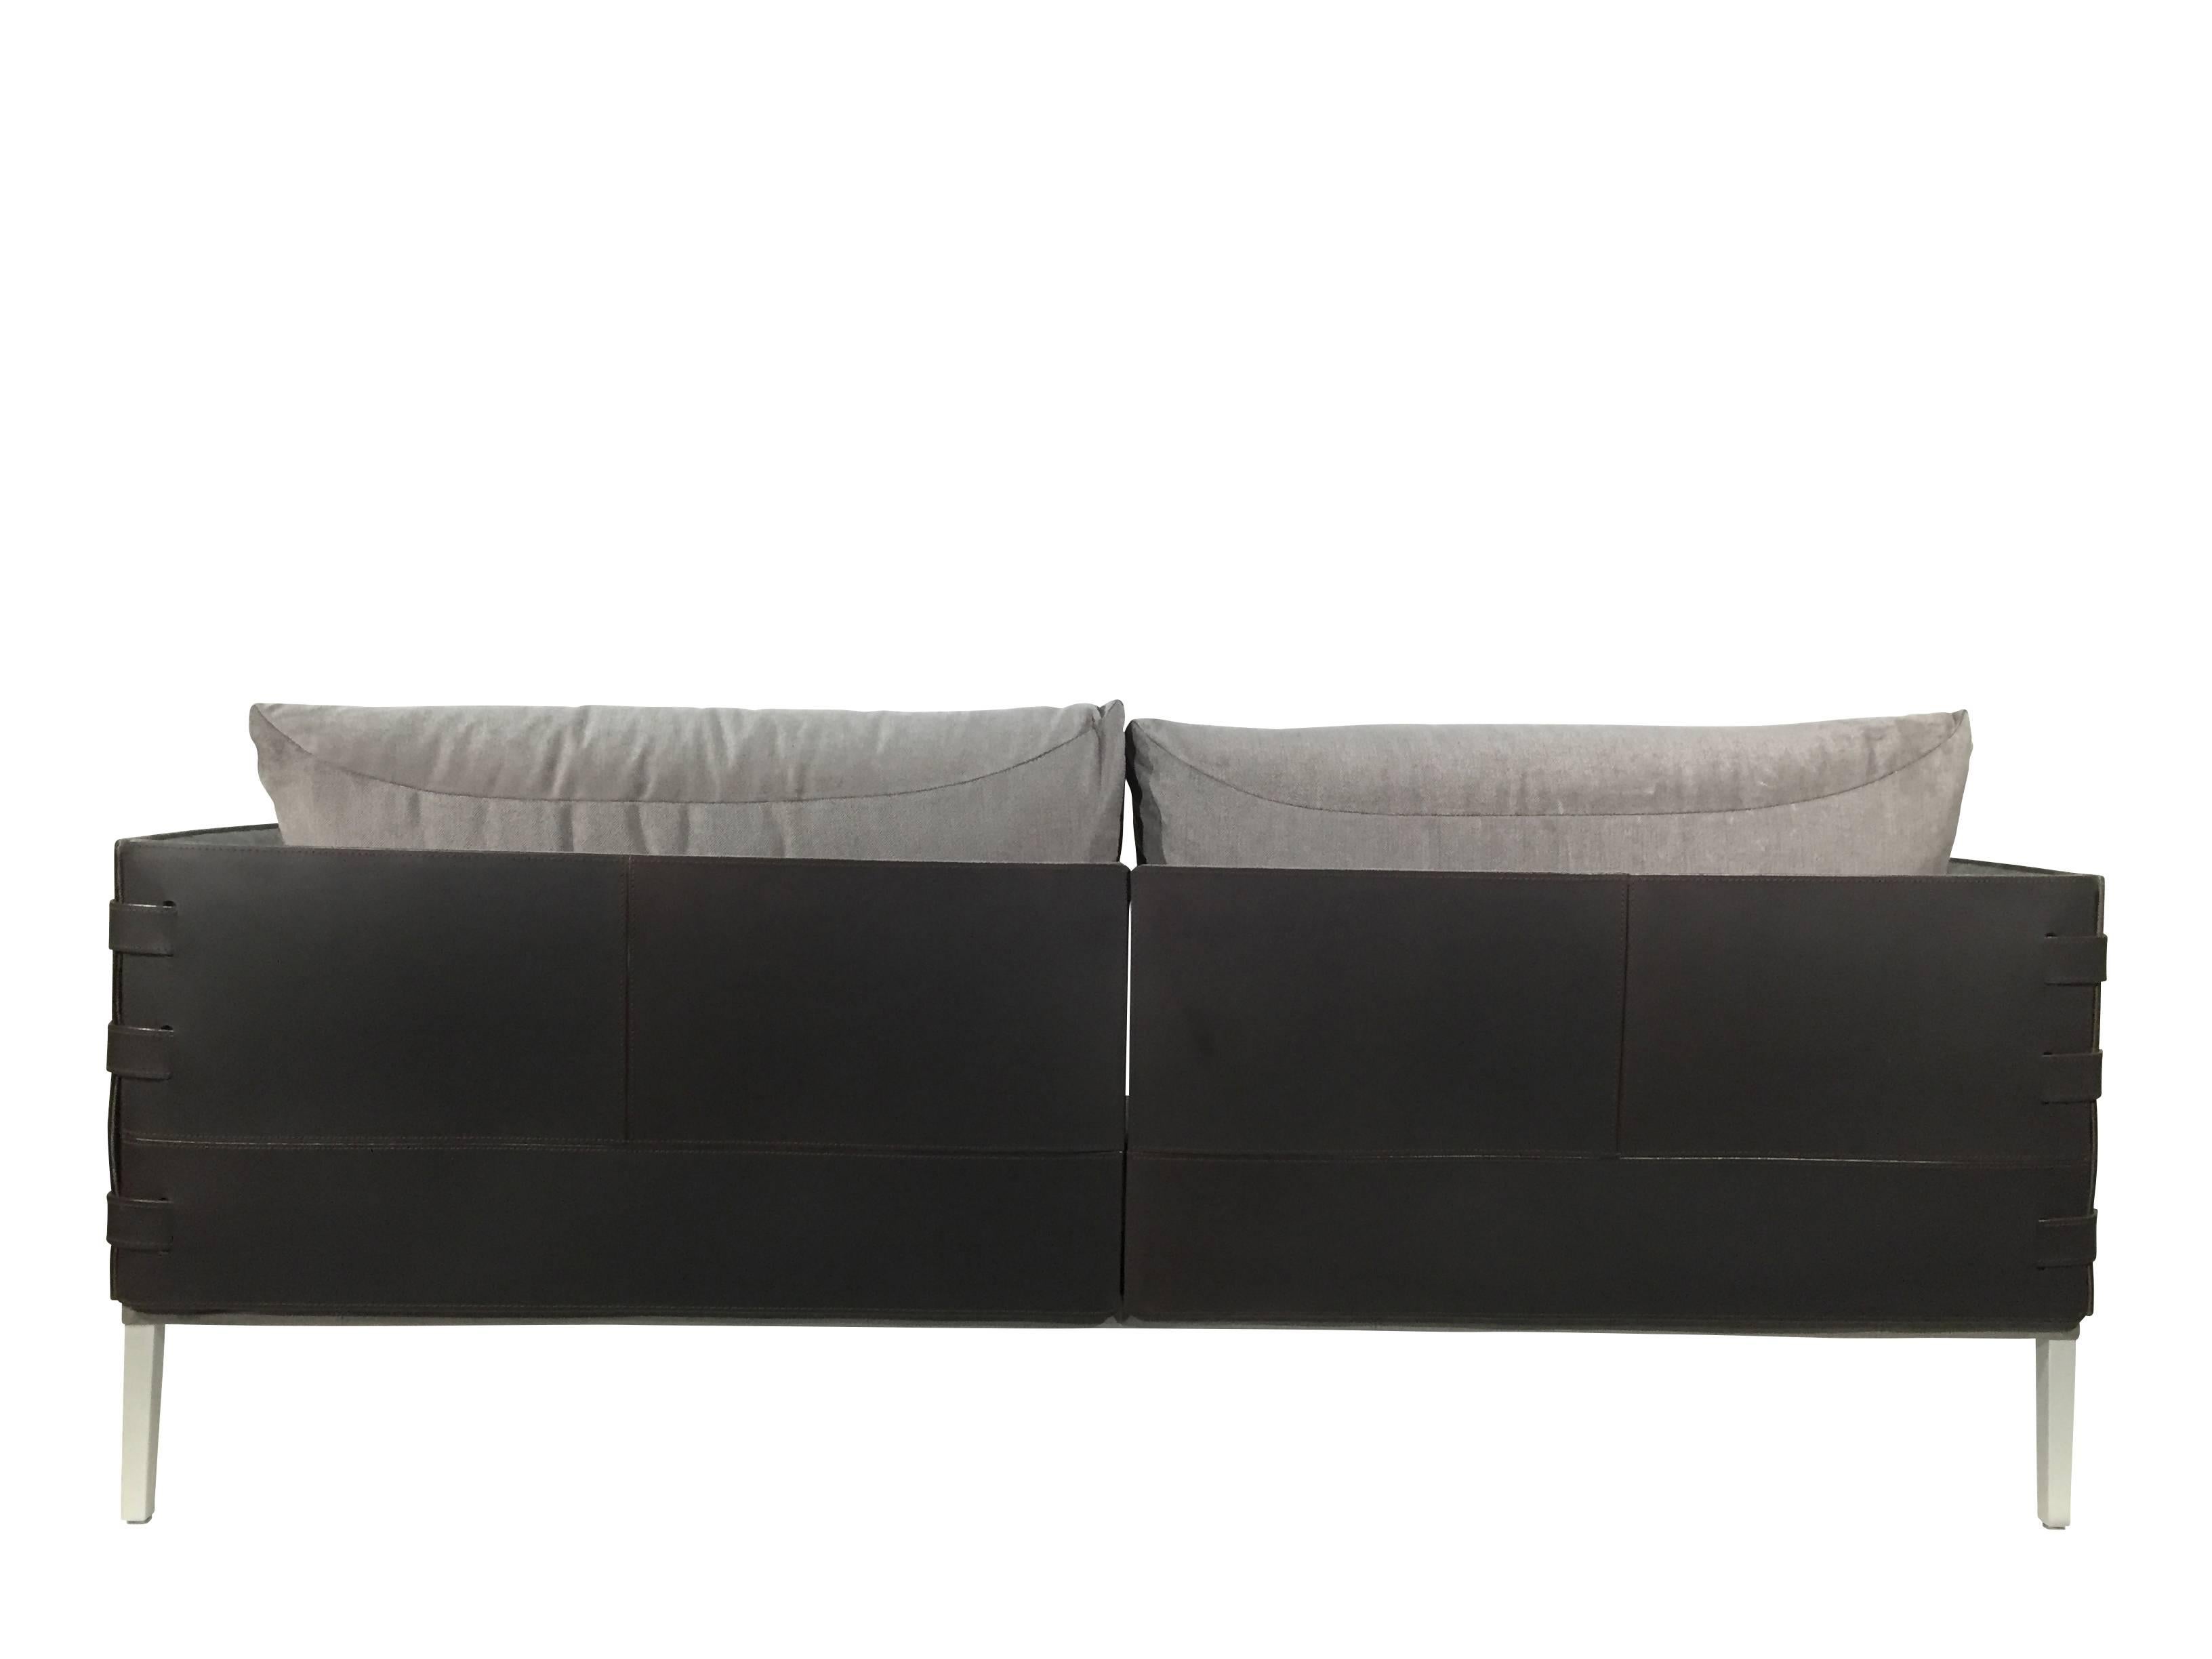 De Sede DS-333/123 sofa in fabric/saddle leather artisano cigarro combo

Sofa with steel tubular frame with integrated webbing, legs in polished aluminum. Seat and back cushions in fabric greenwood, back in saddle leather artisano